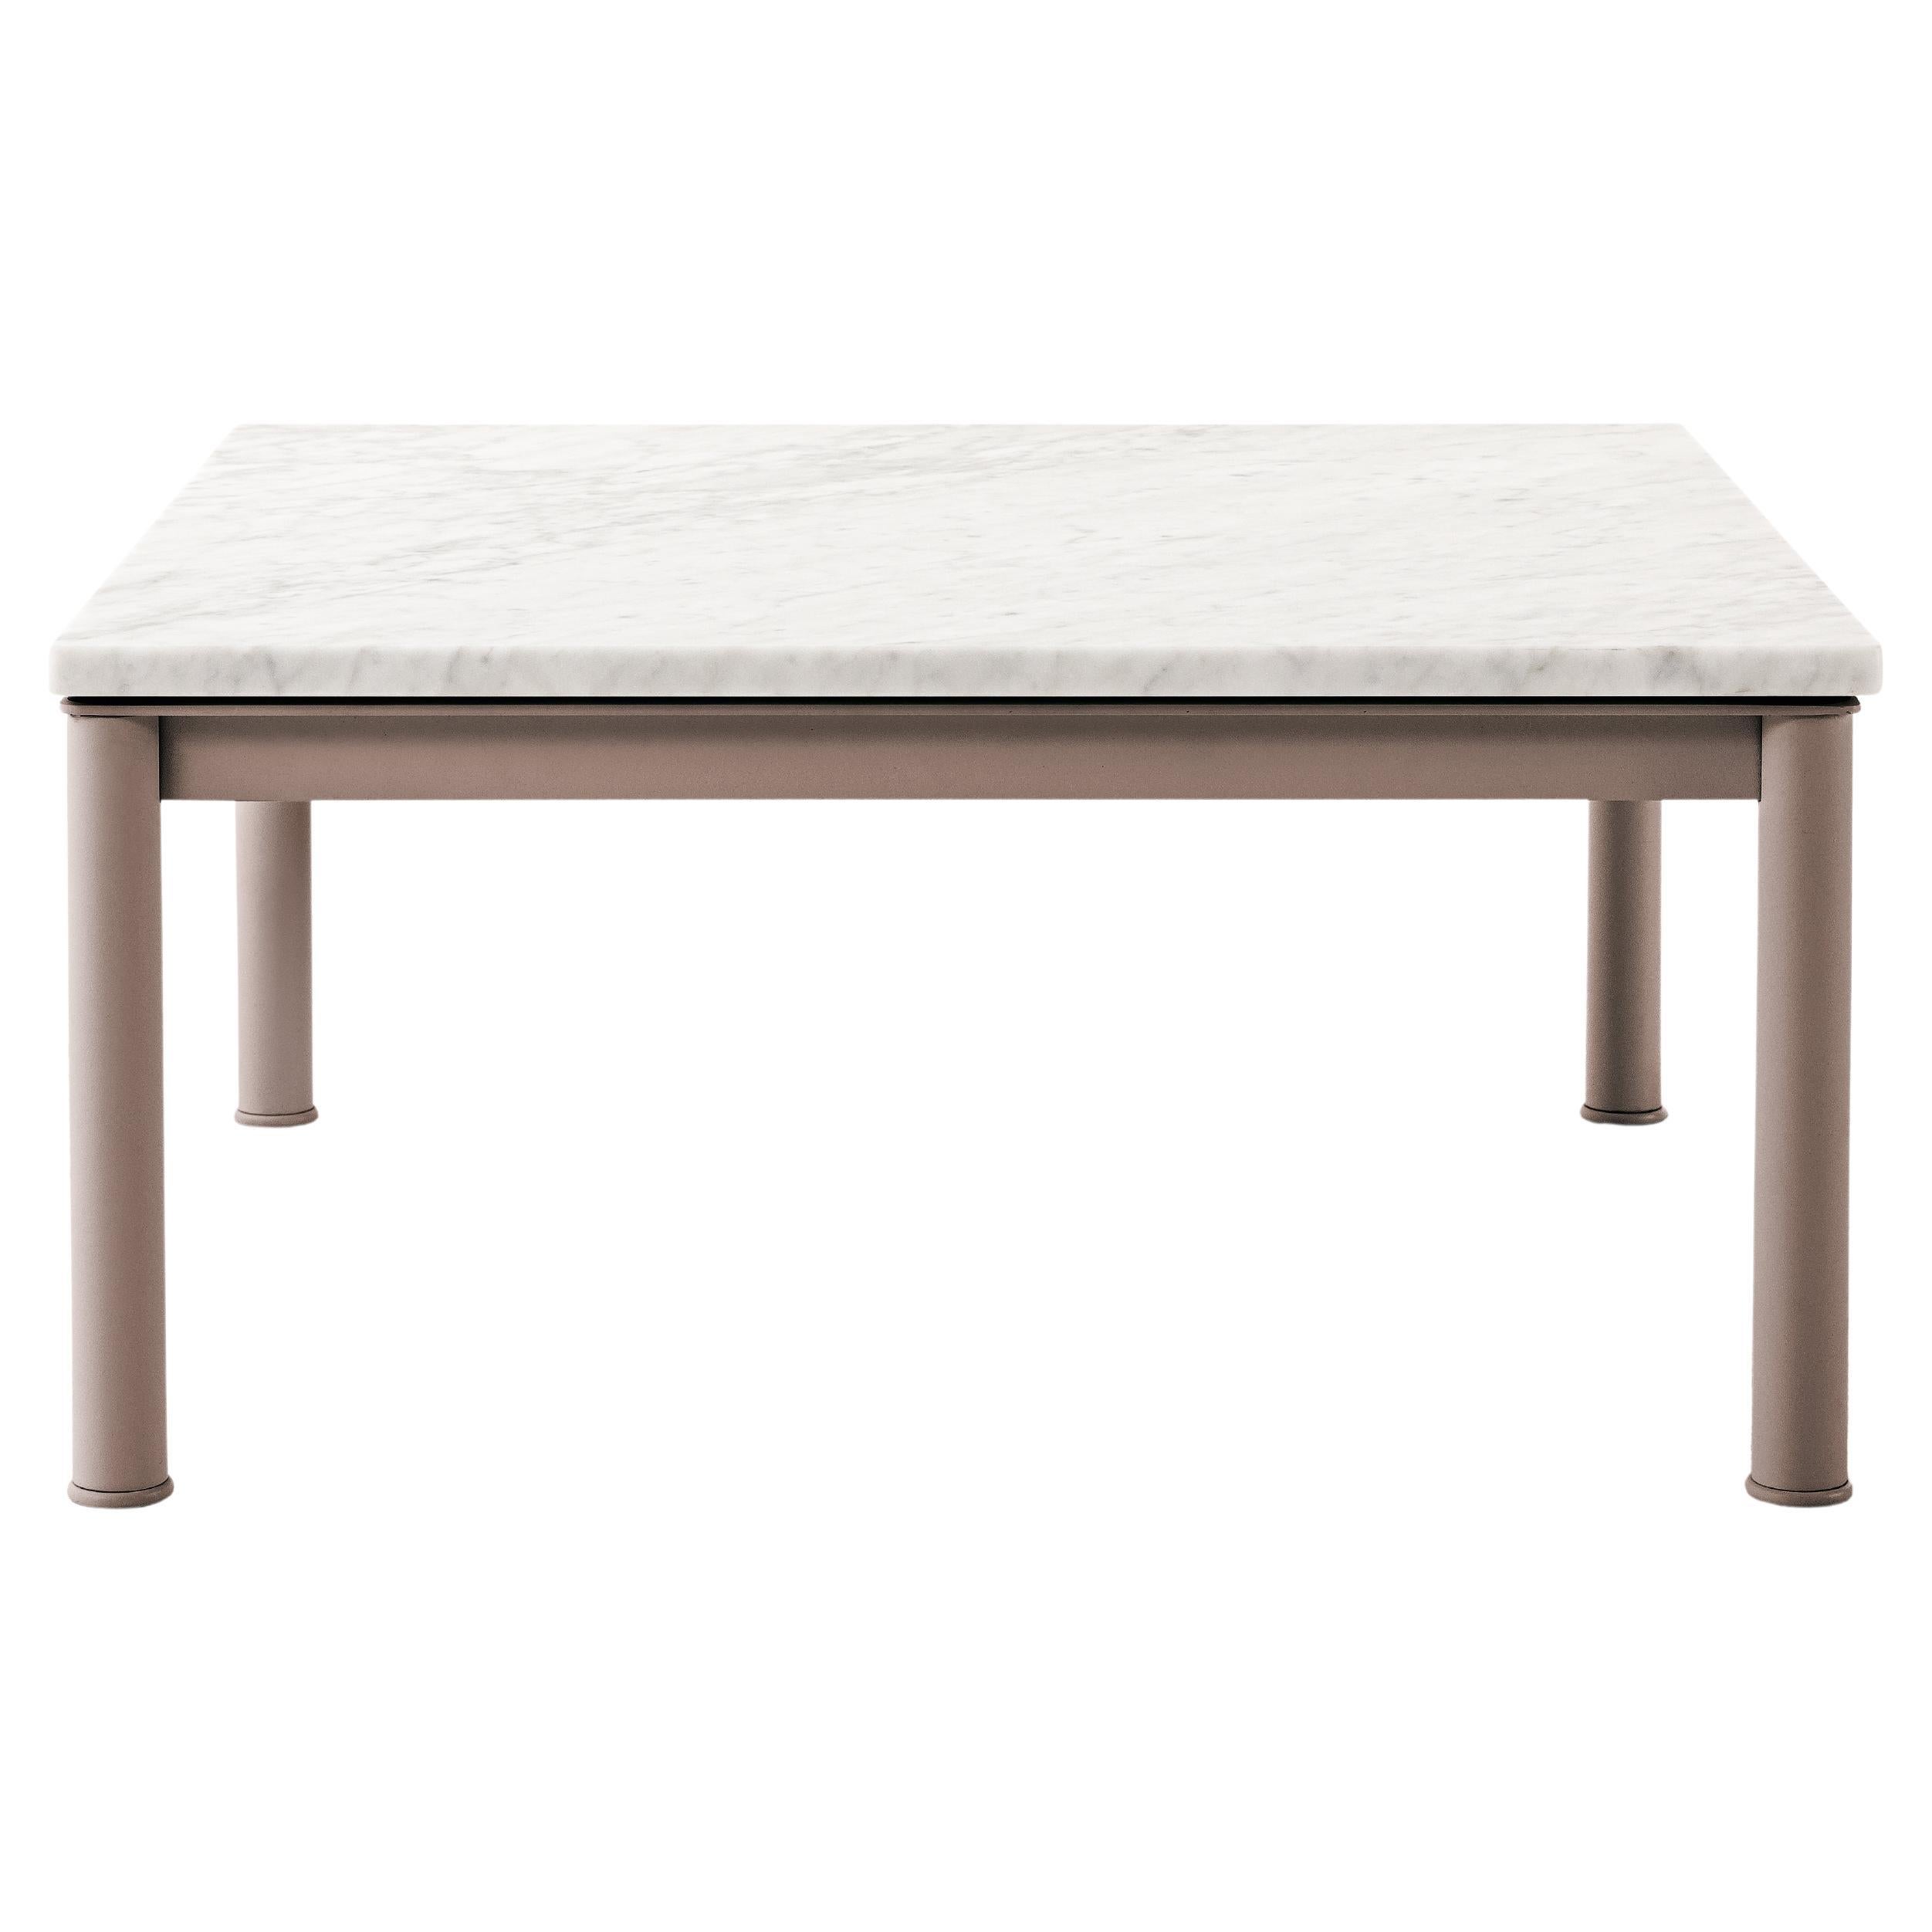 Le Corbusier, Pierre Jeanneret, Charlotte Perriand LC10 T5 Mud Table by Cassina